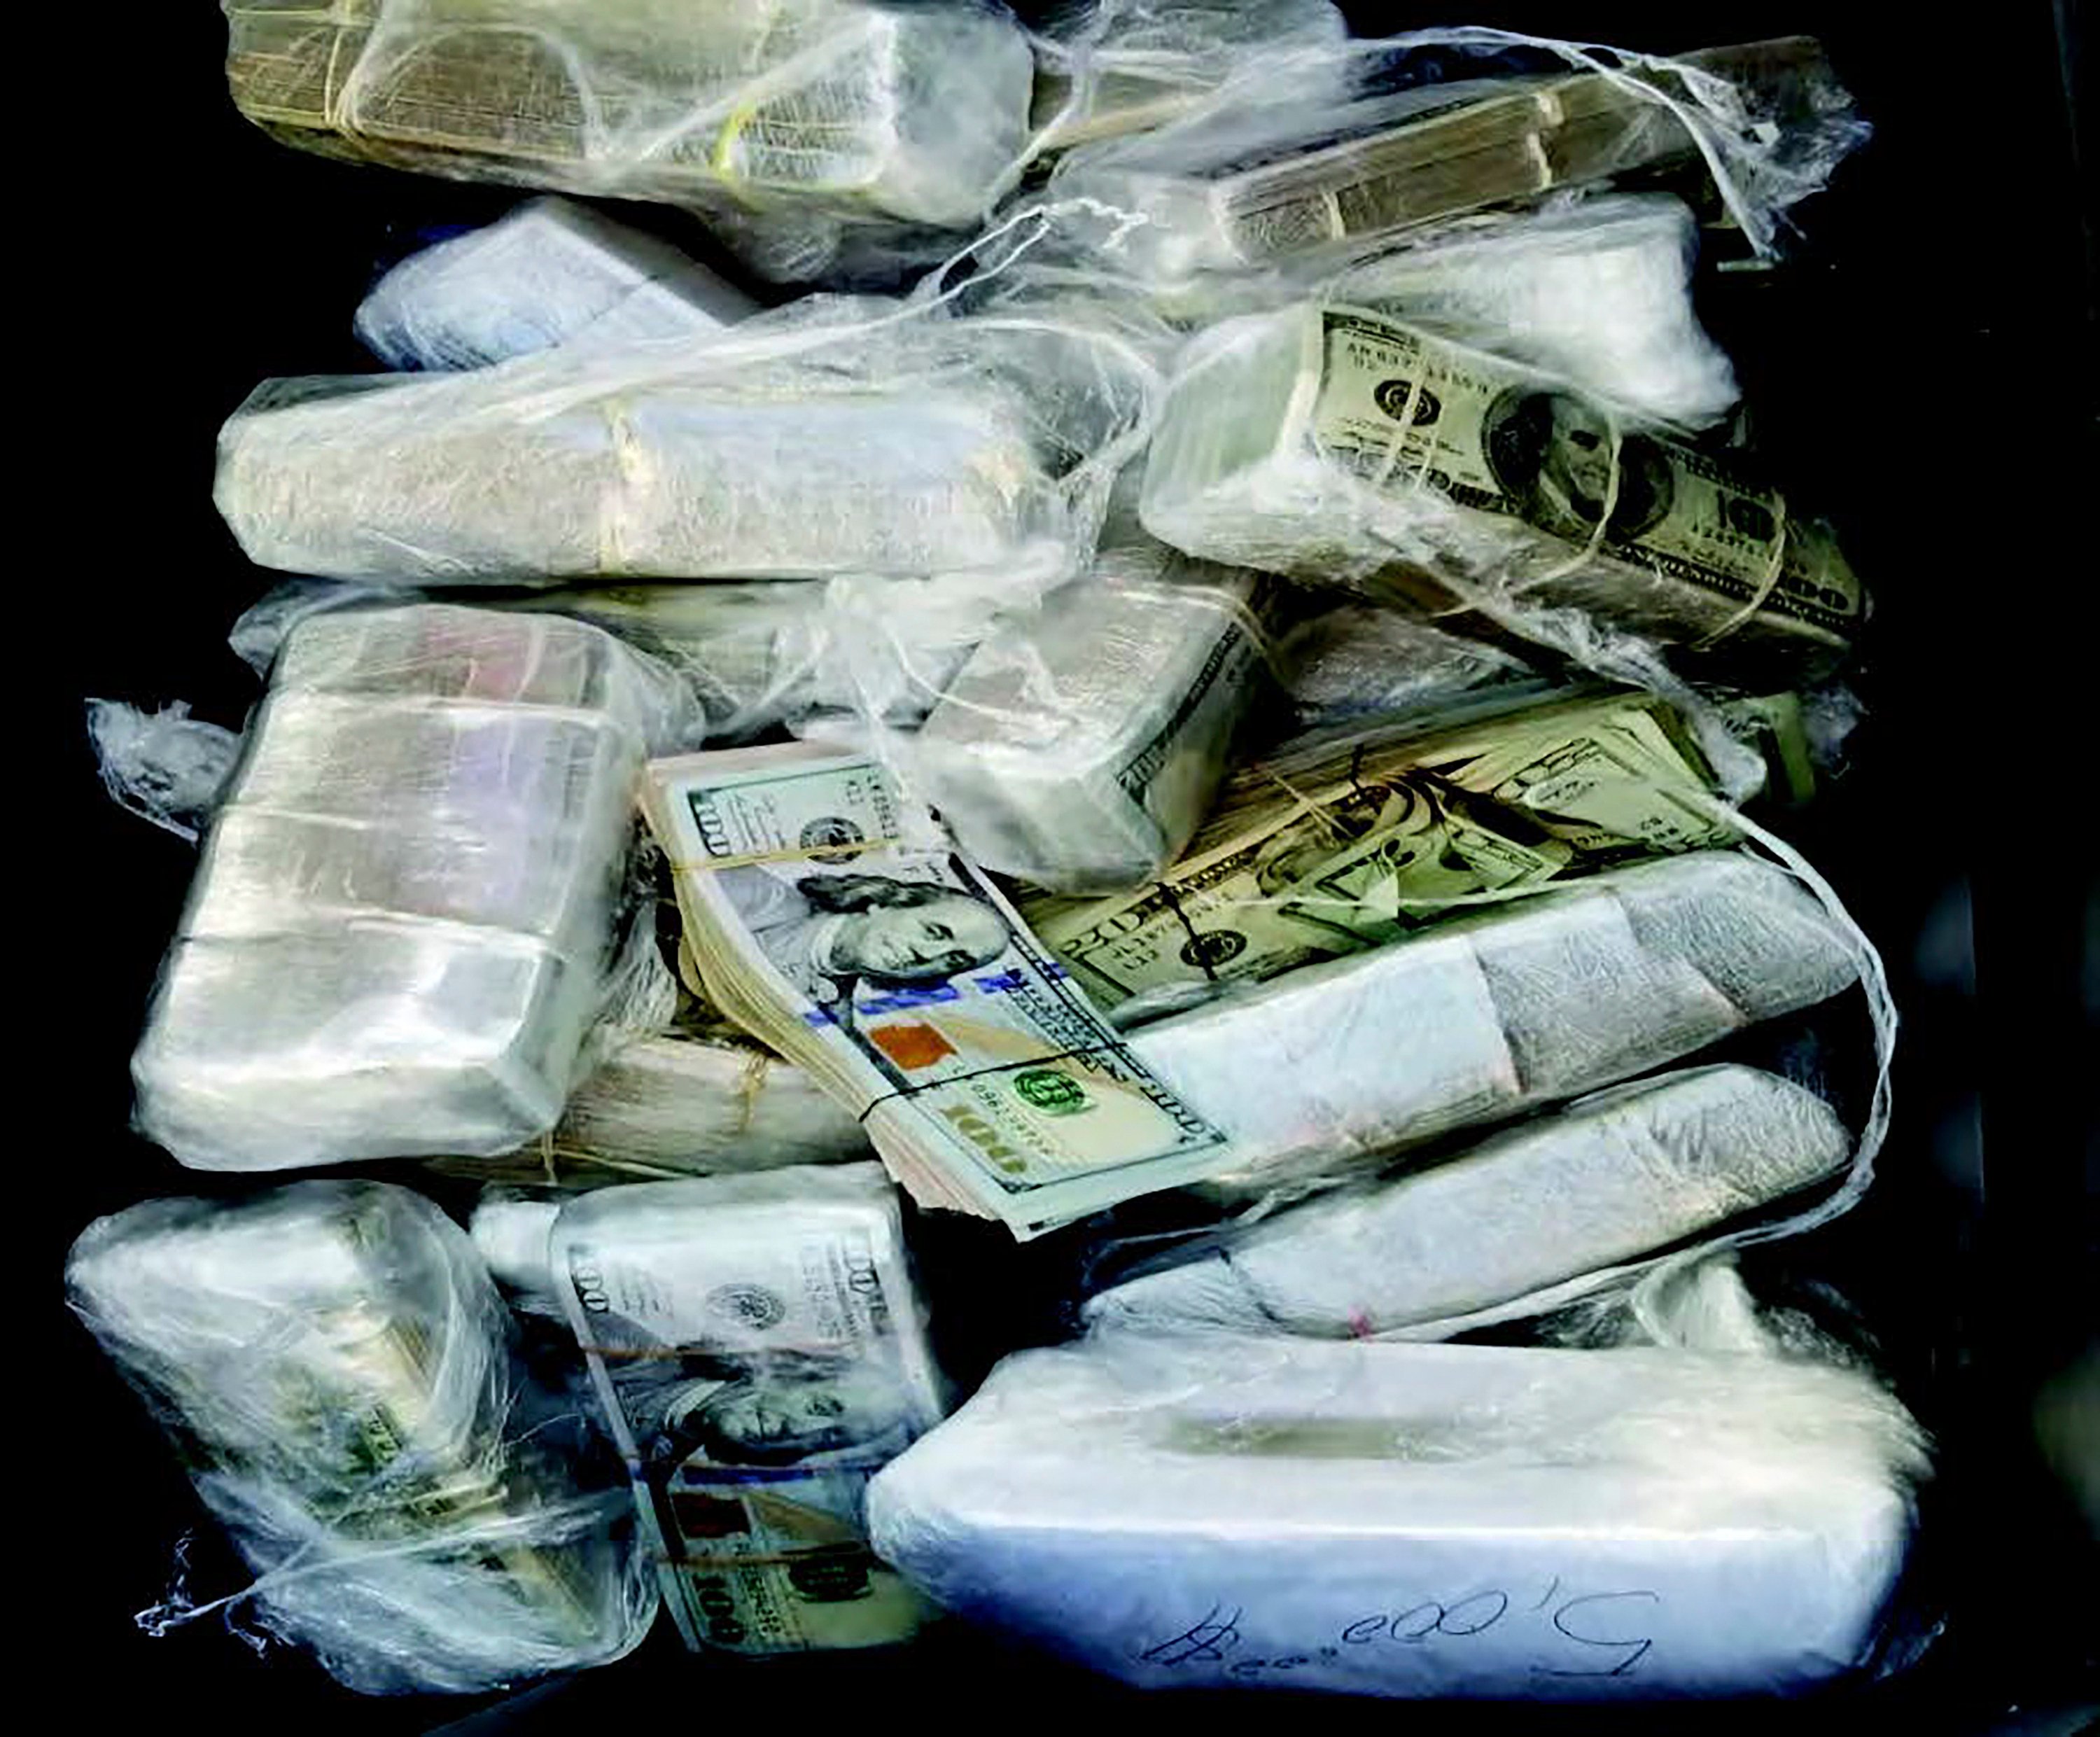 Confiscated drug money is seen in an undated photo provided by US authorities. Photo: US District Attorney via AP